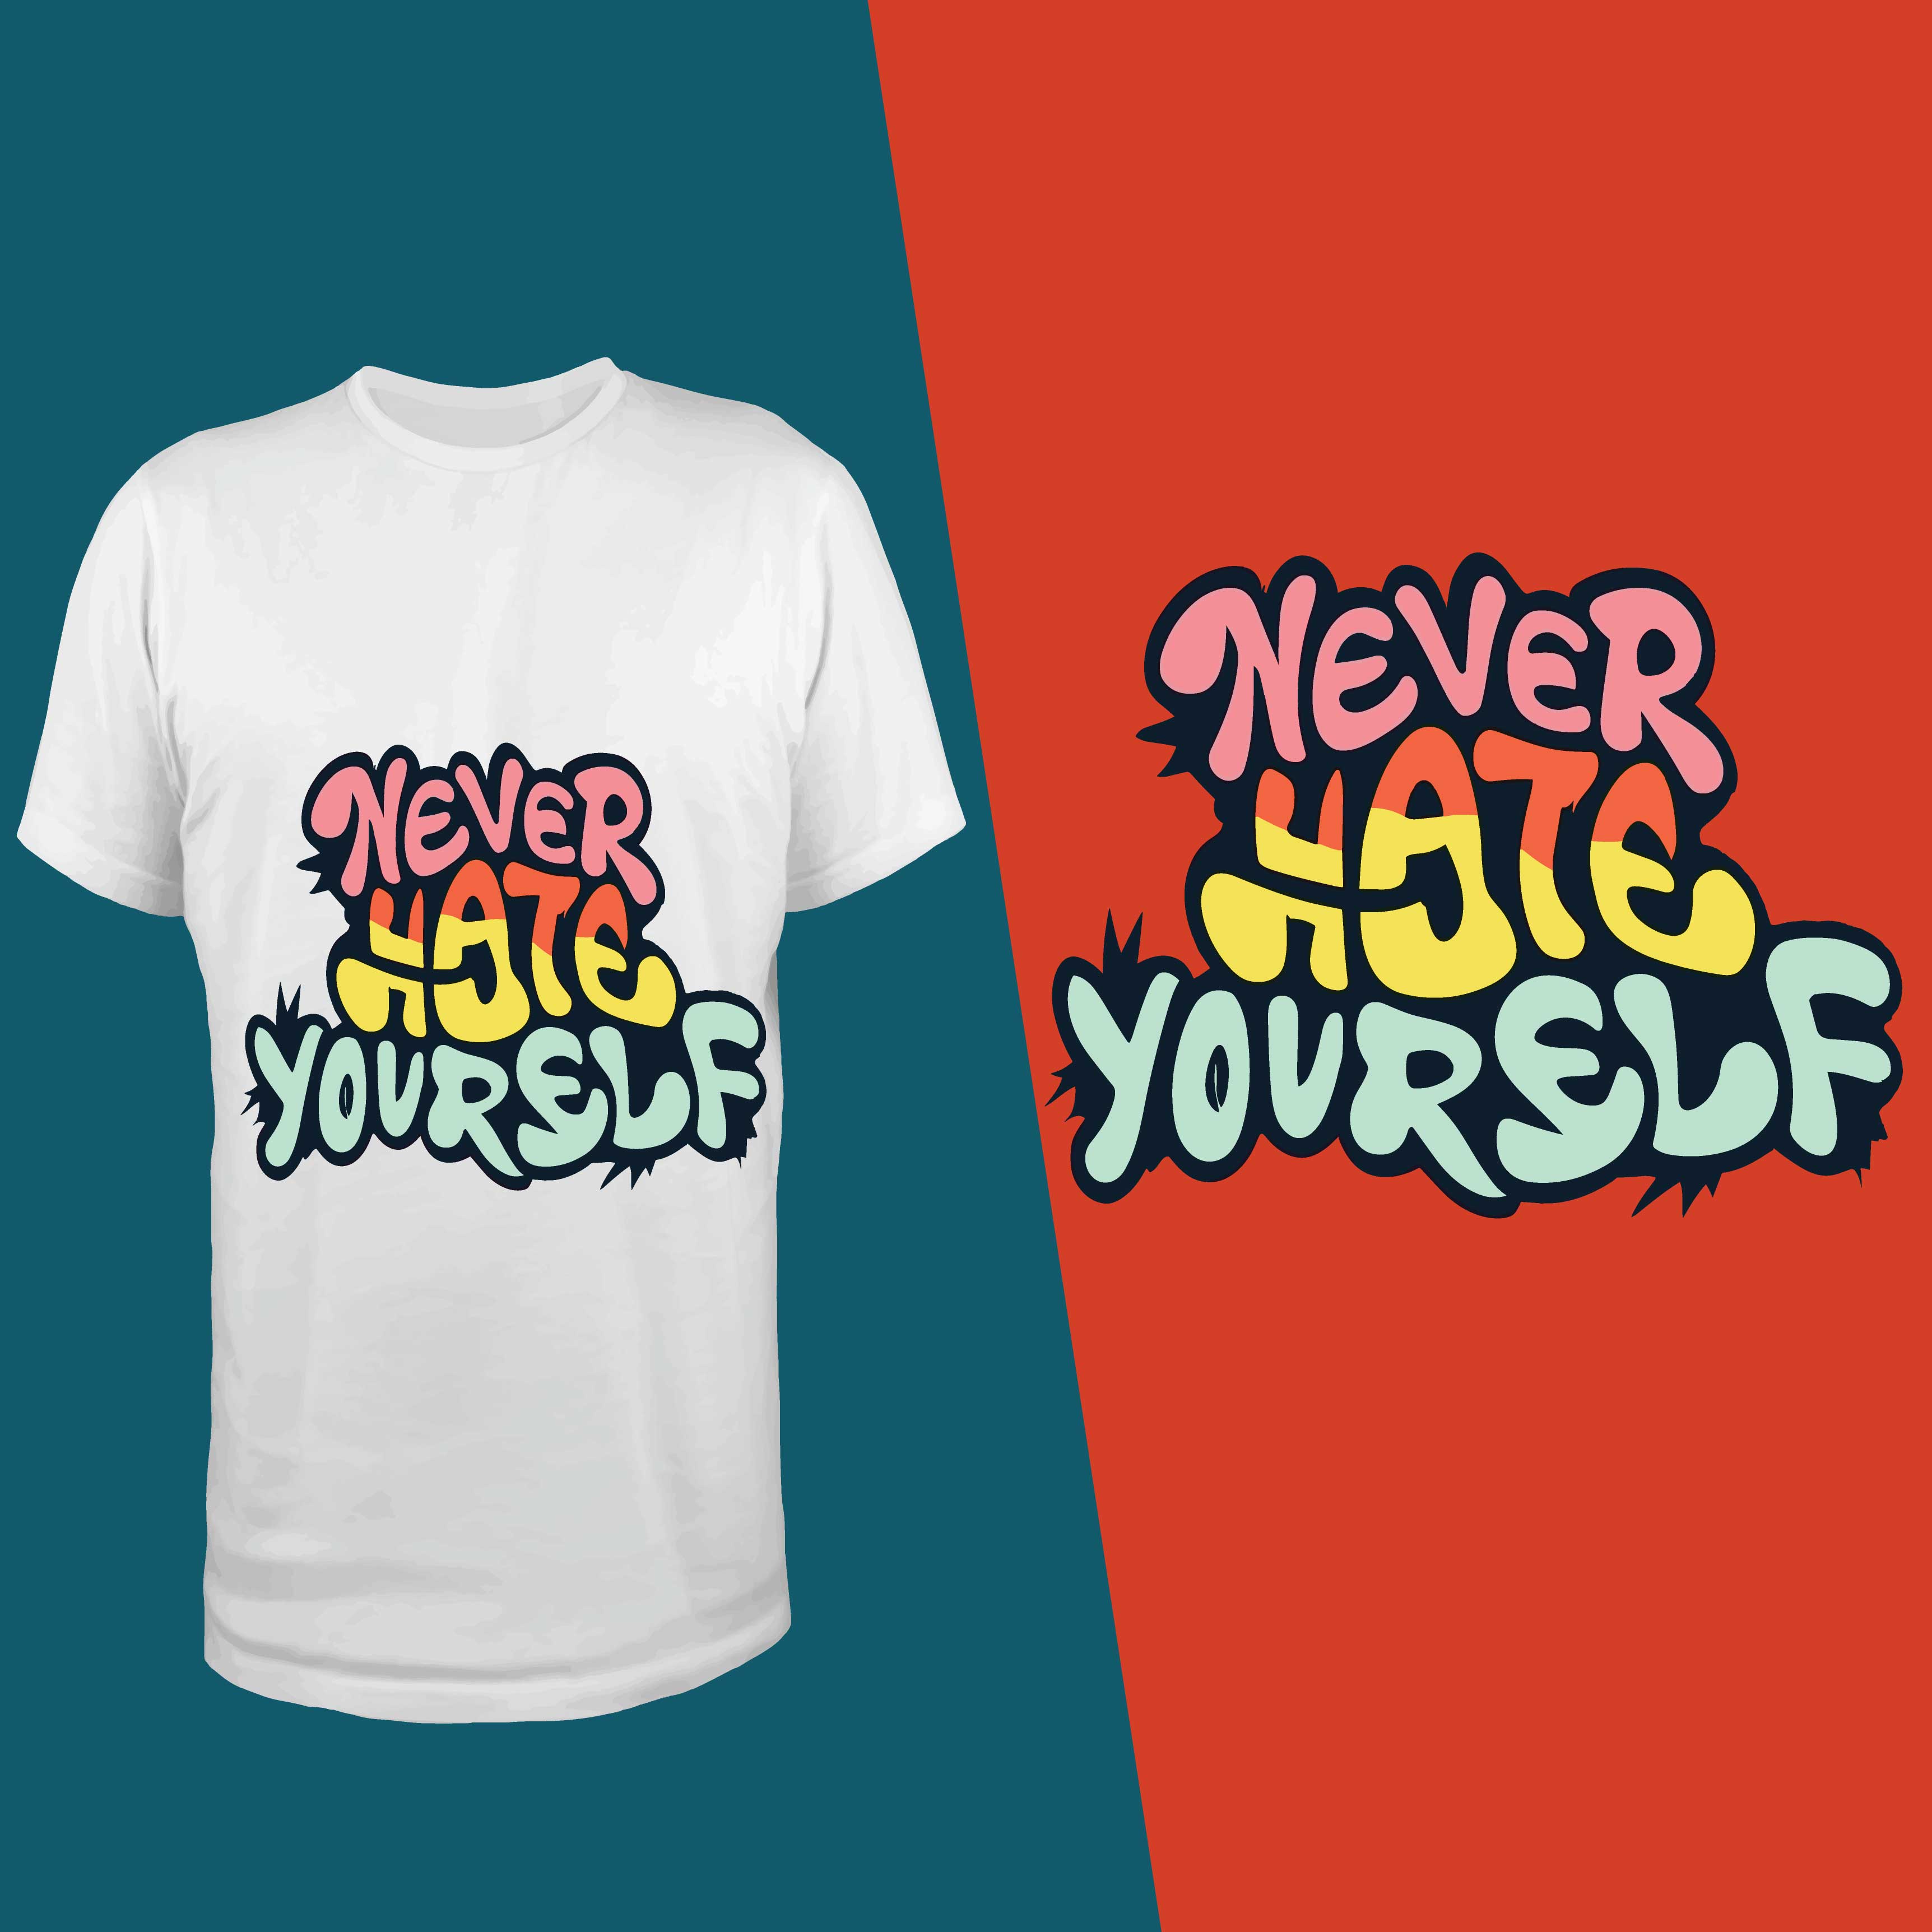 t shirt of never hate yourself in a colorful text converted 216